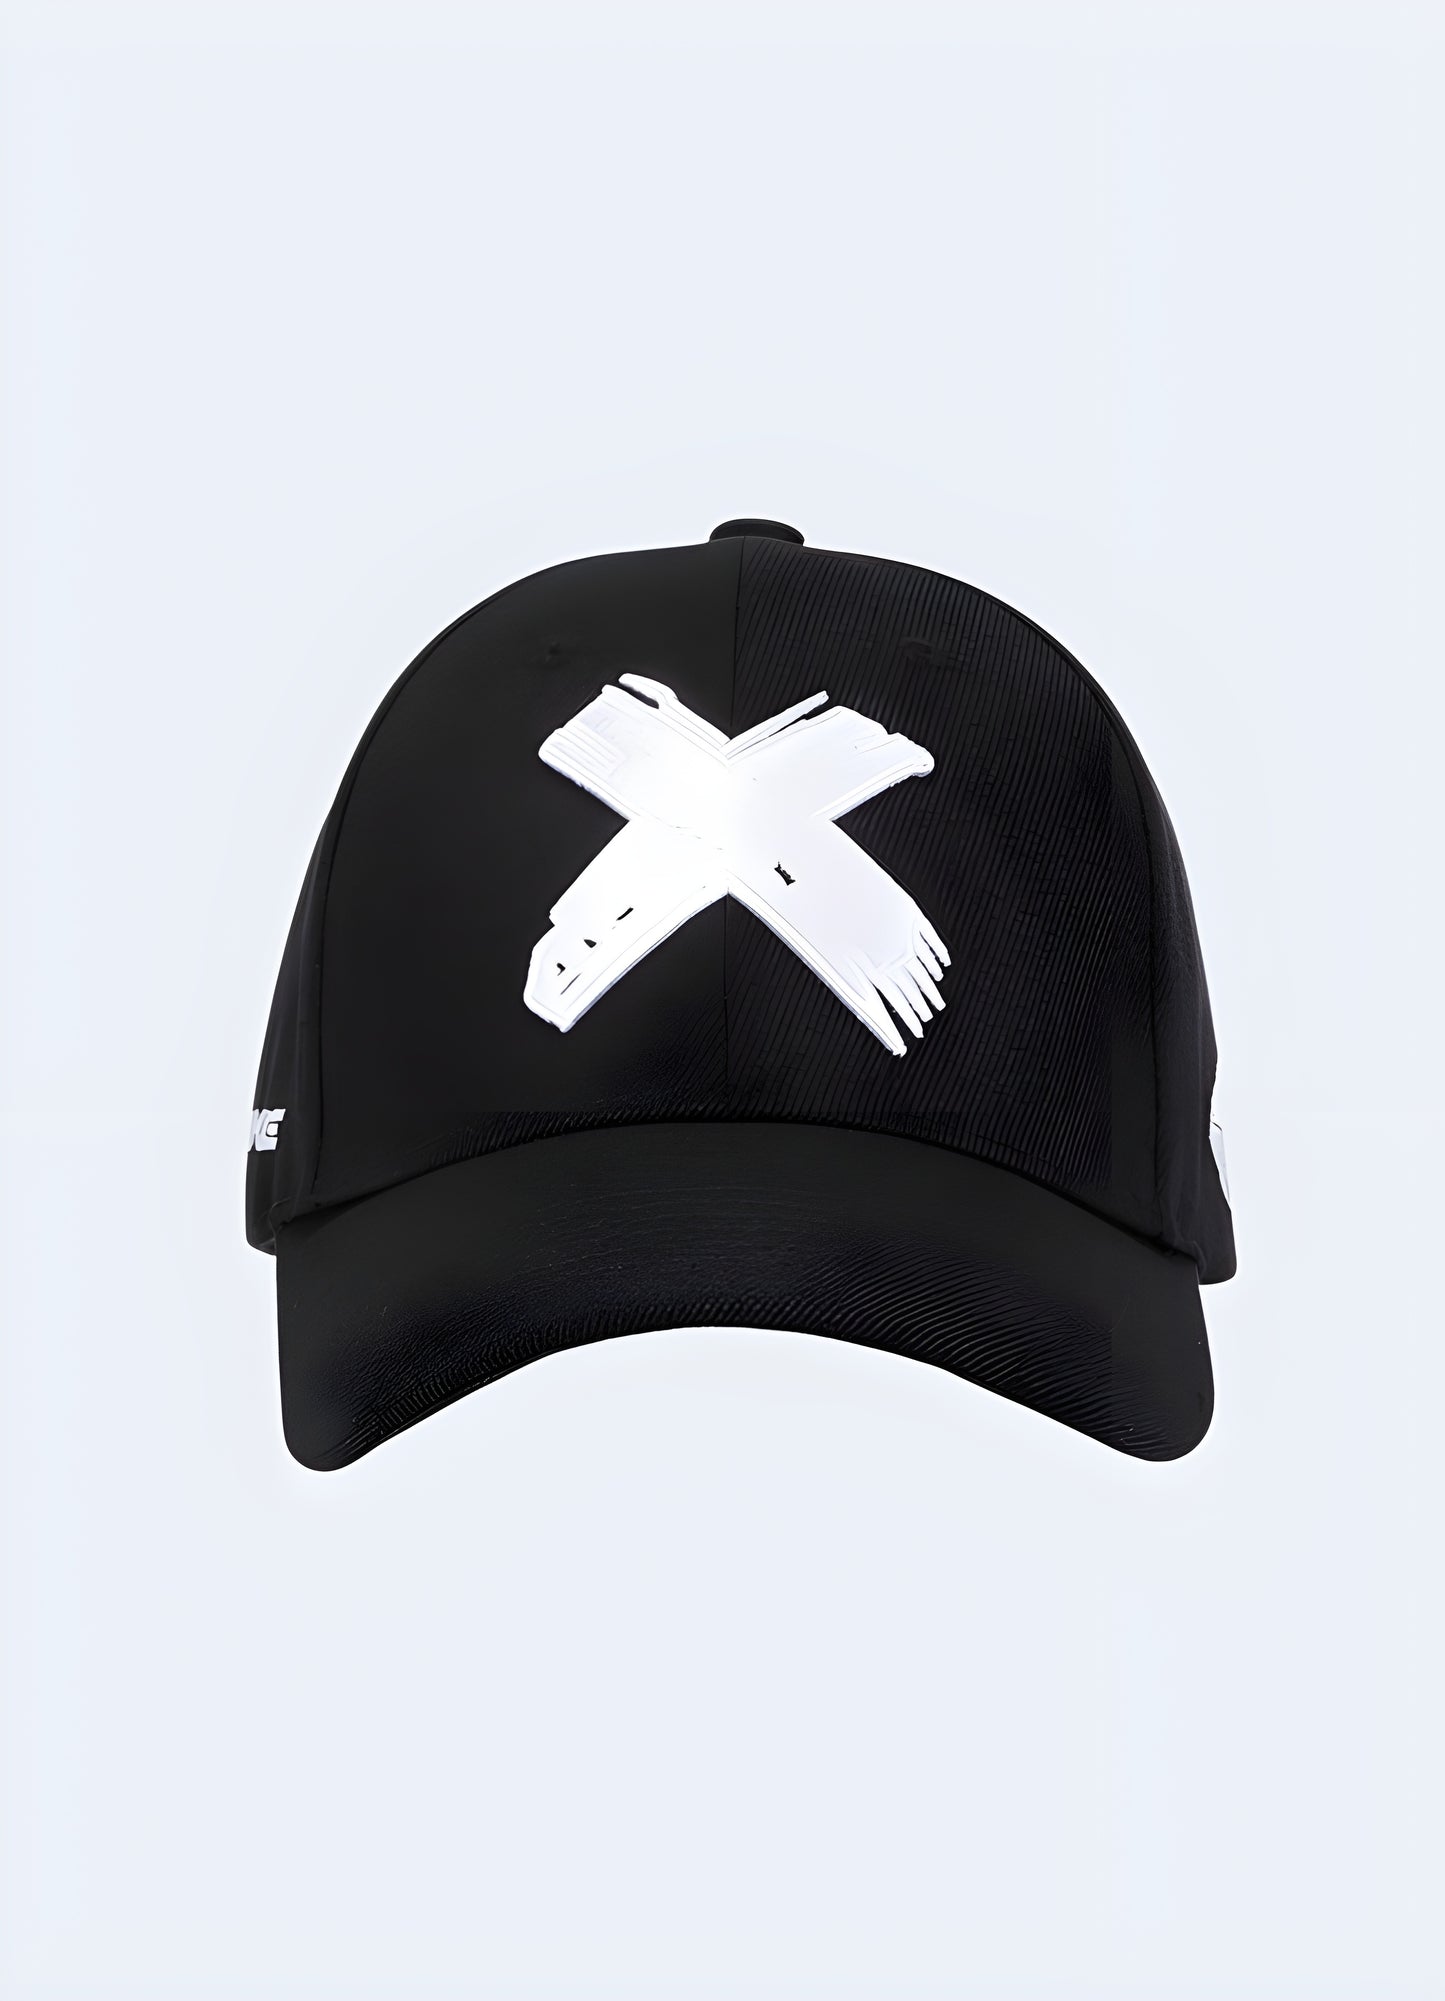 Sleek baseball cap with bold cross logo patch, perfect for casual style.